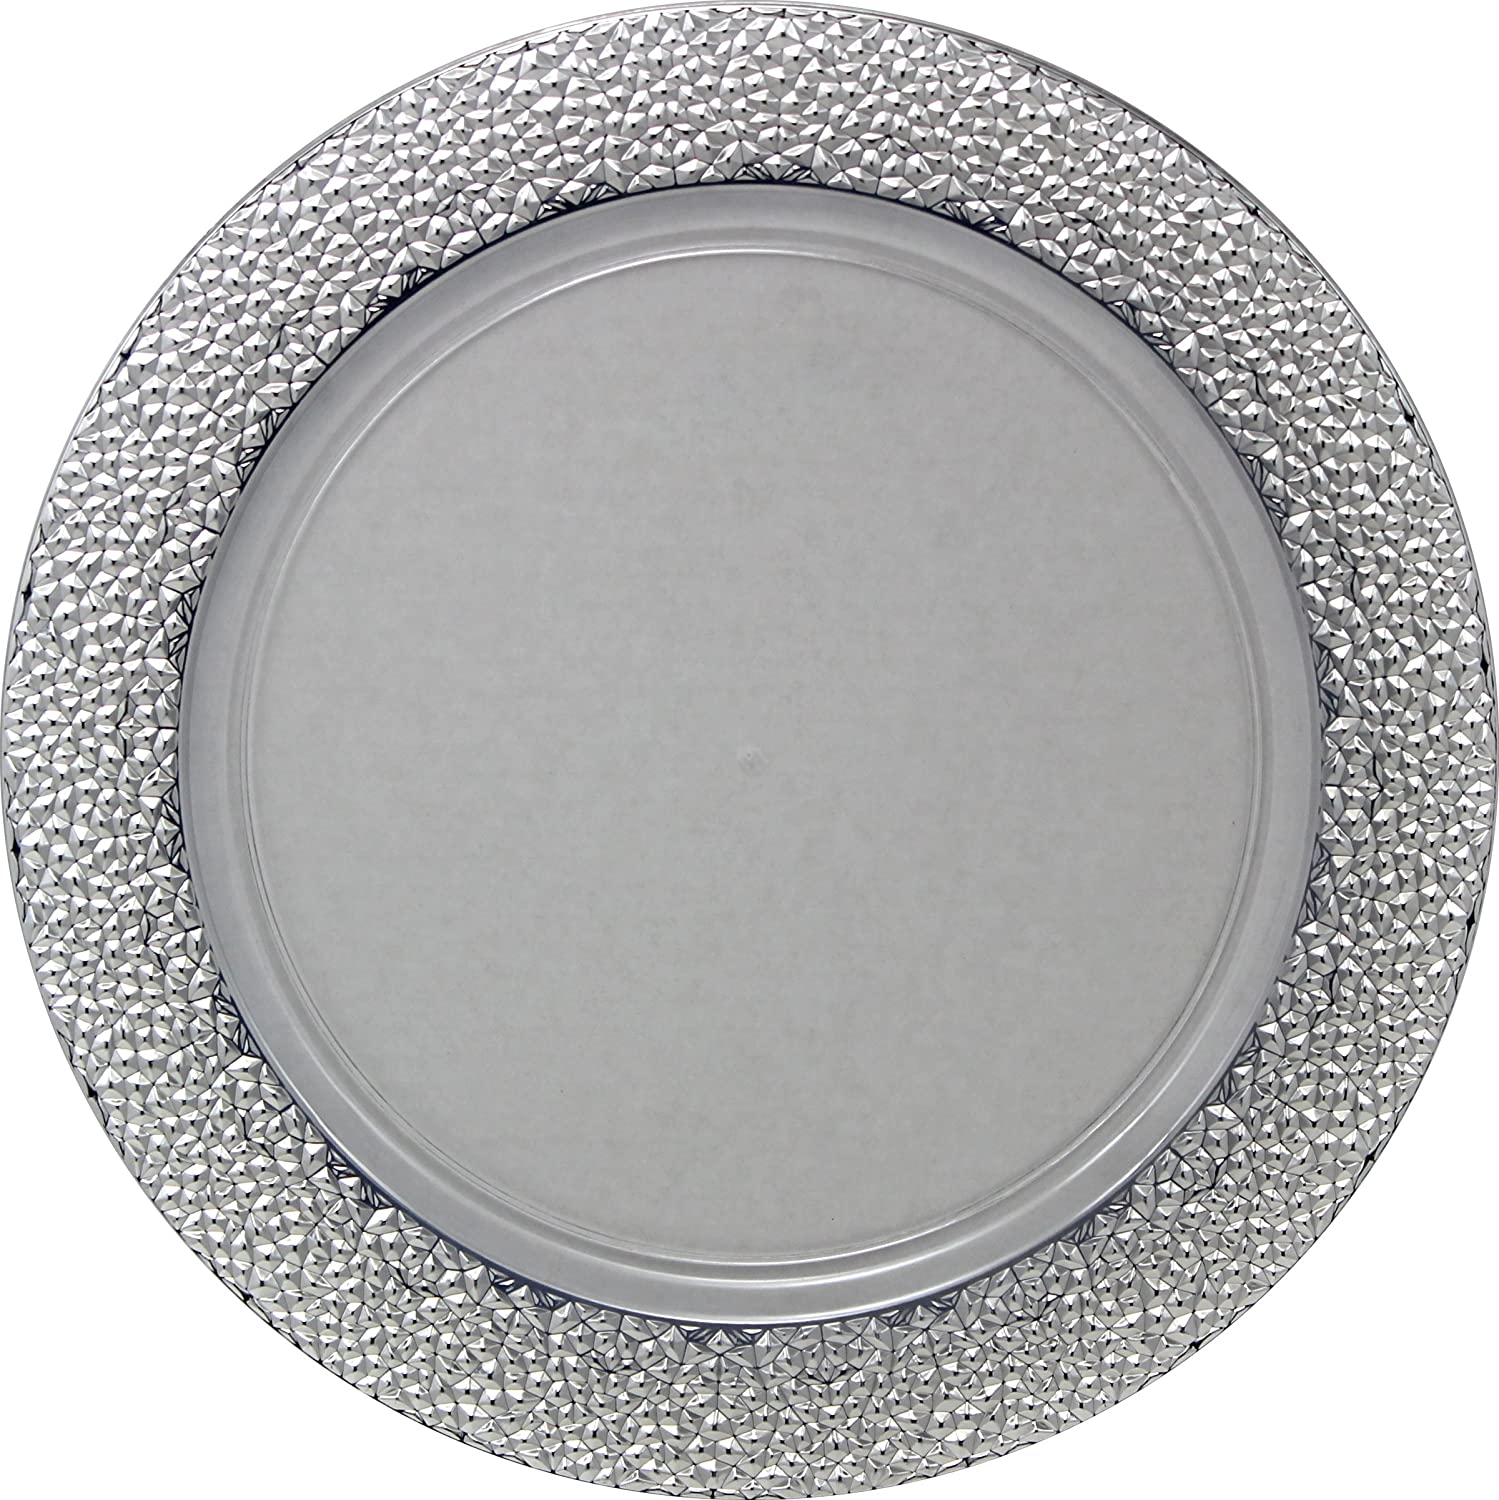 Charger Hammered Design Plates Silver 13" 2CT Tablesettings Decorline   